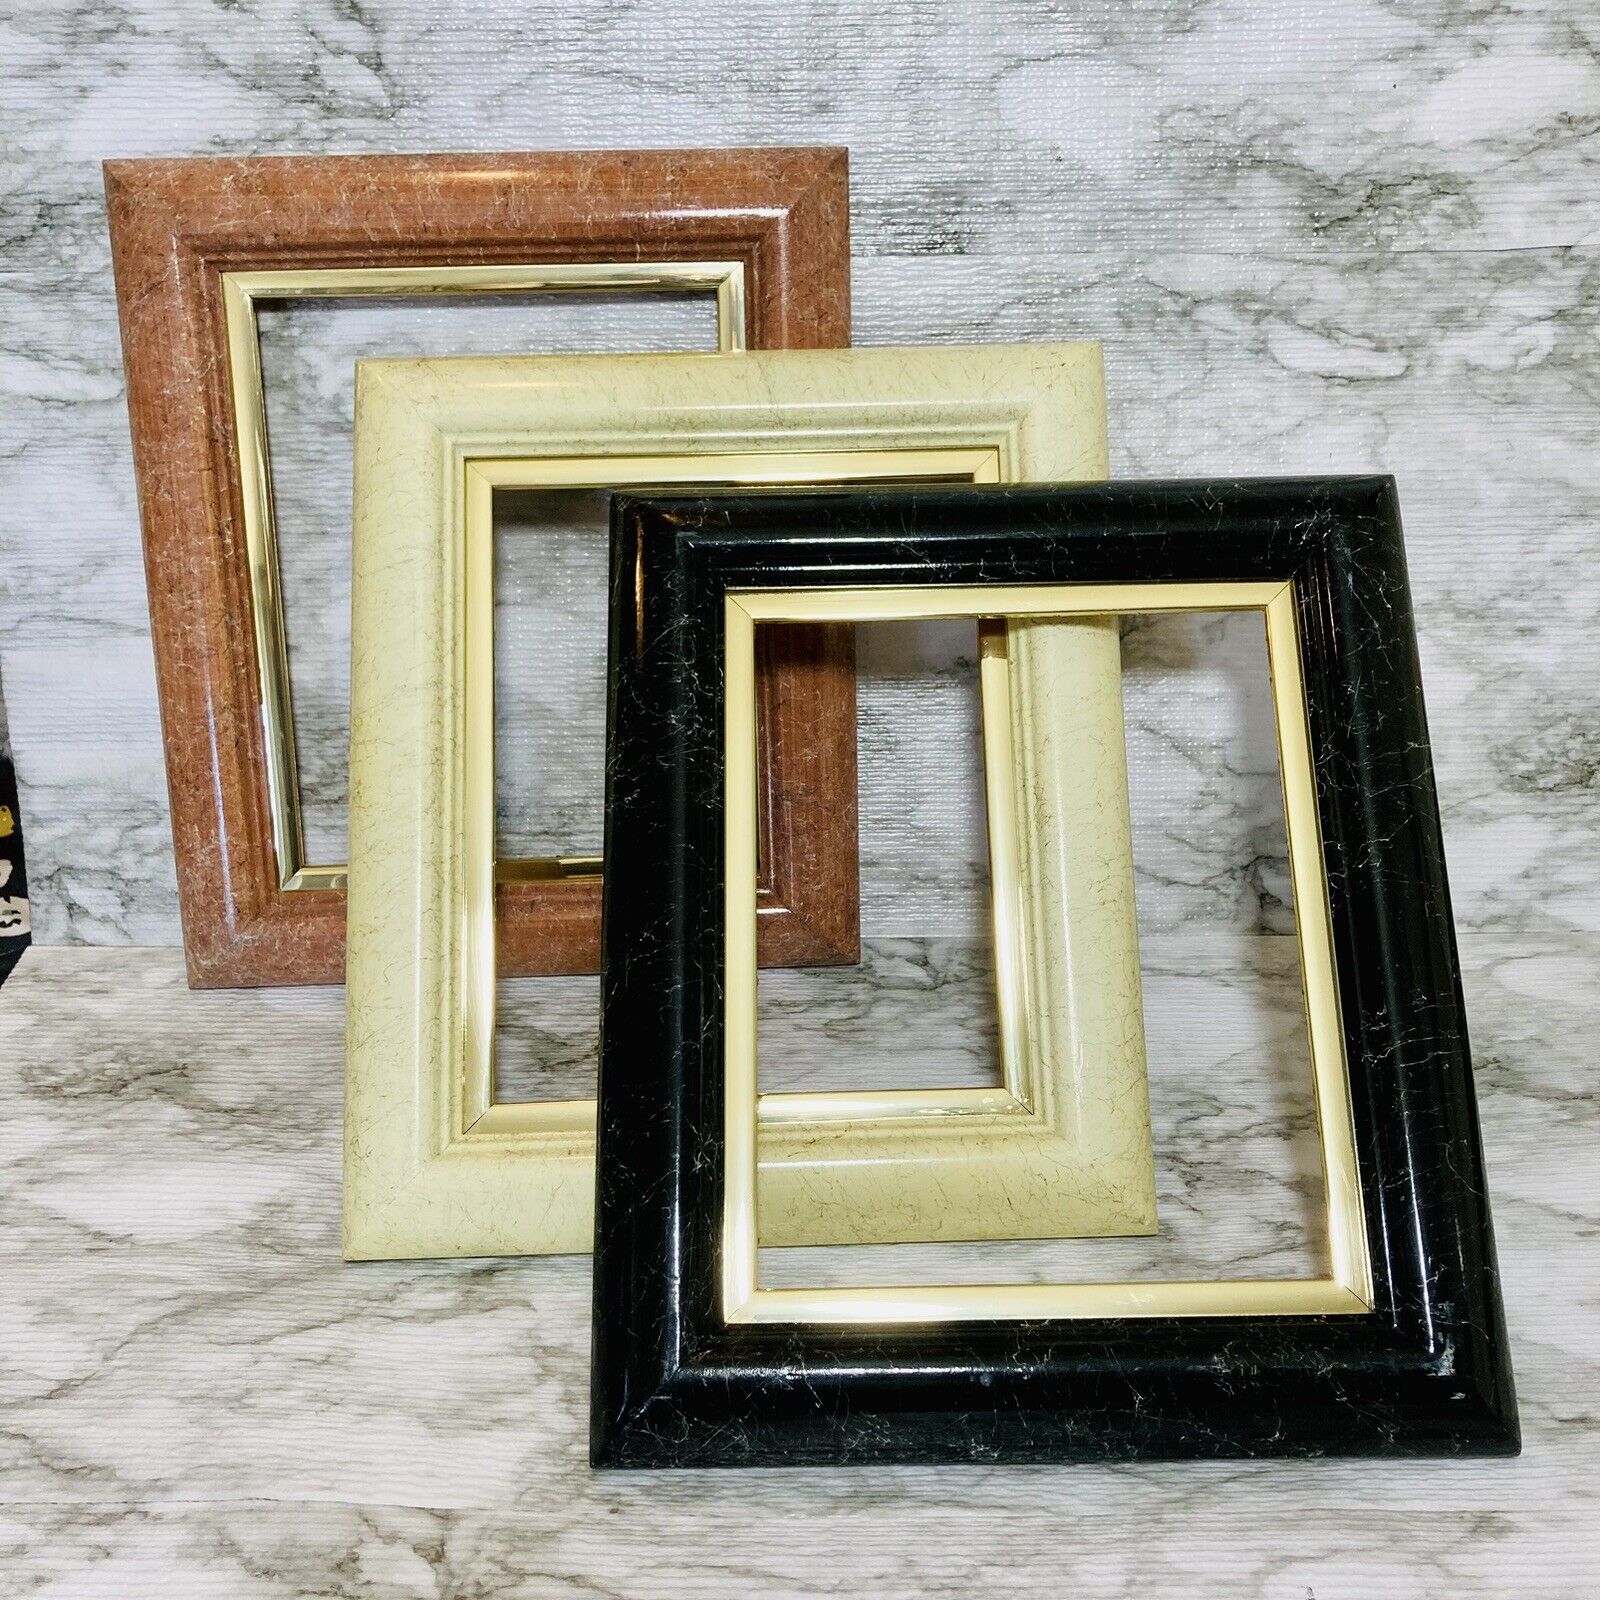 Vintage 1980’s 12”x14” Solid Wood With Vein Design Wall Frames For 8”x10” Photo